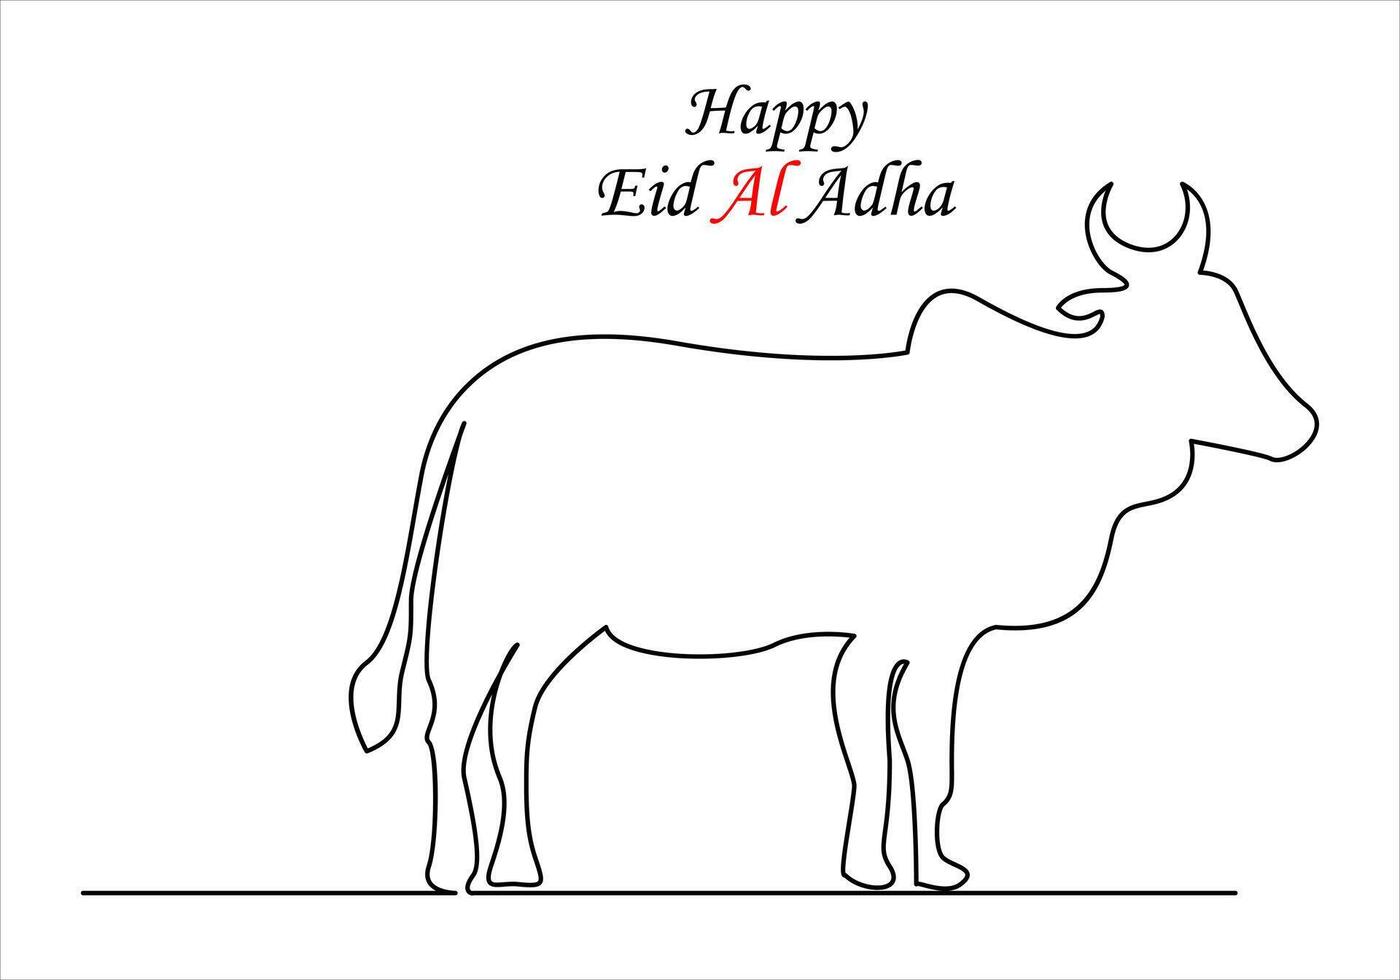 Continuous one line drawing of eid al adha out line vector art illustration